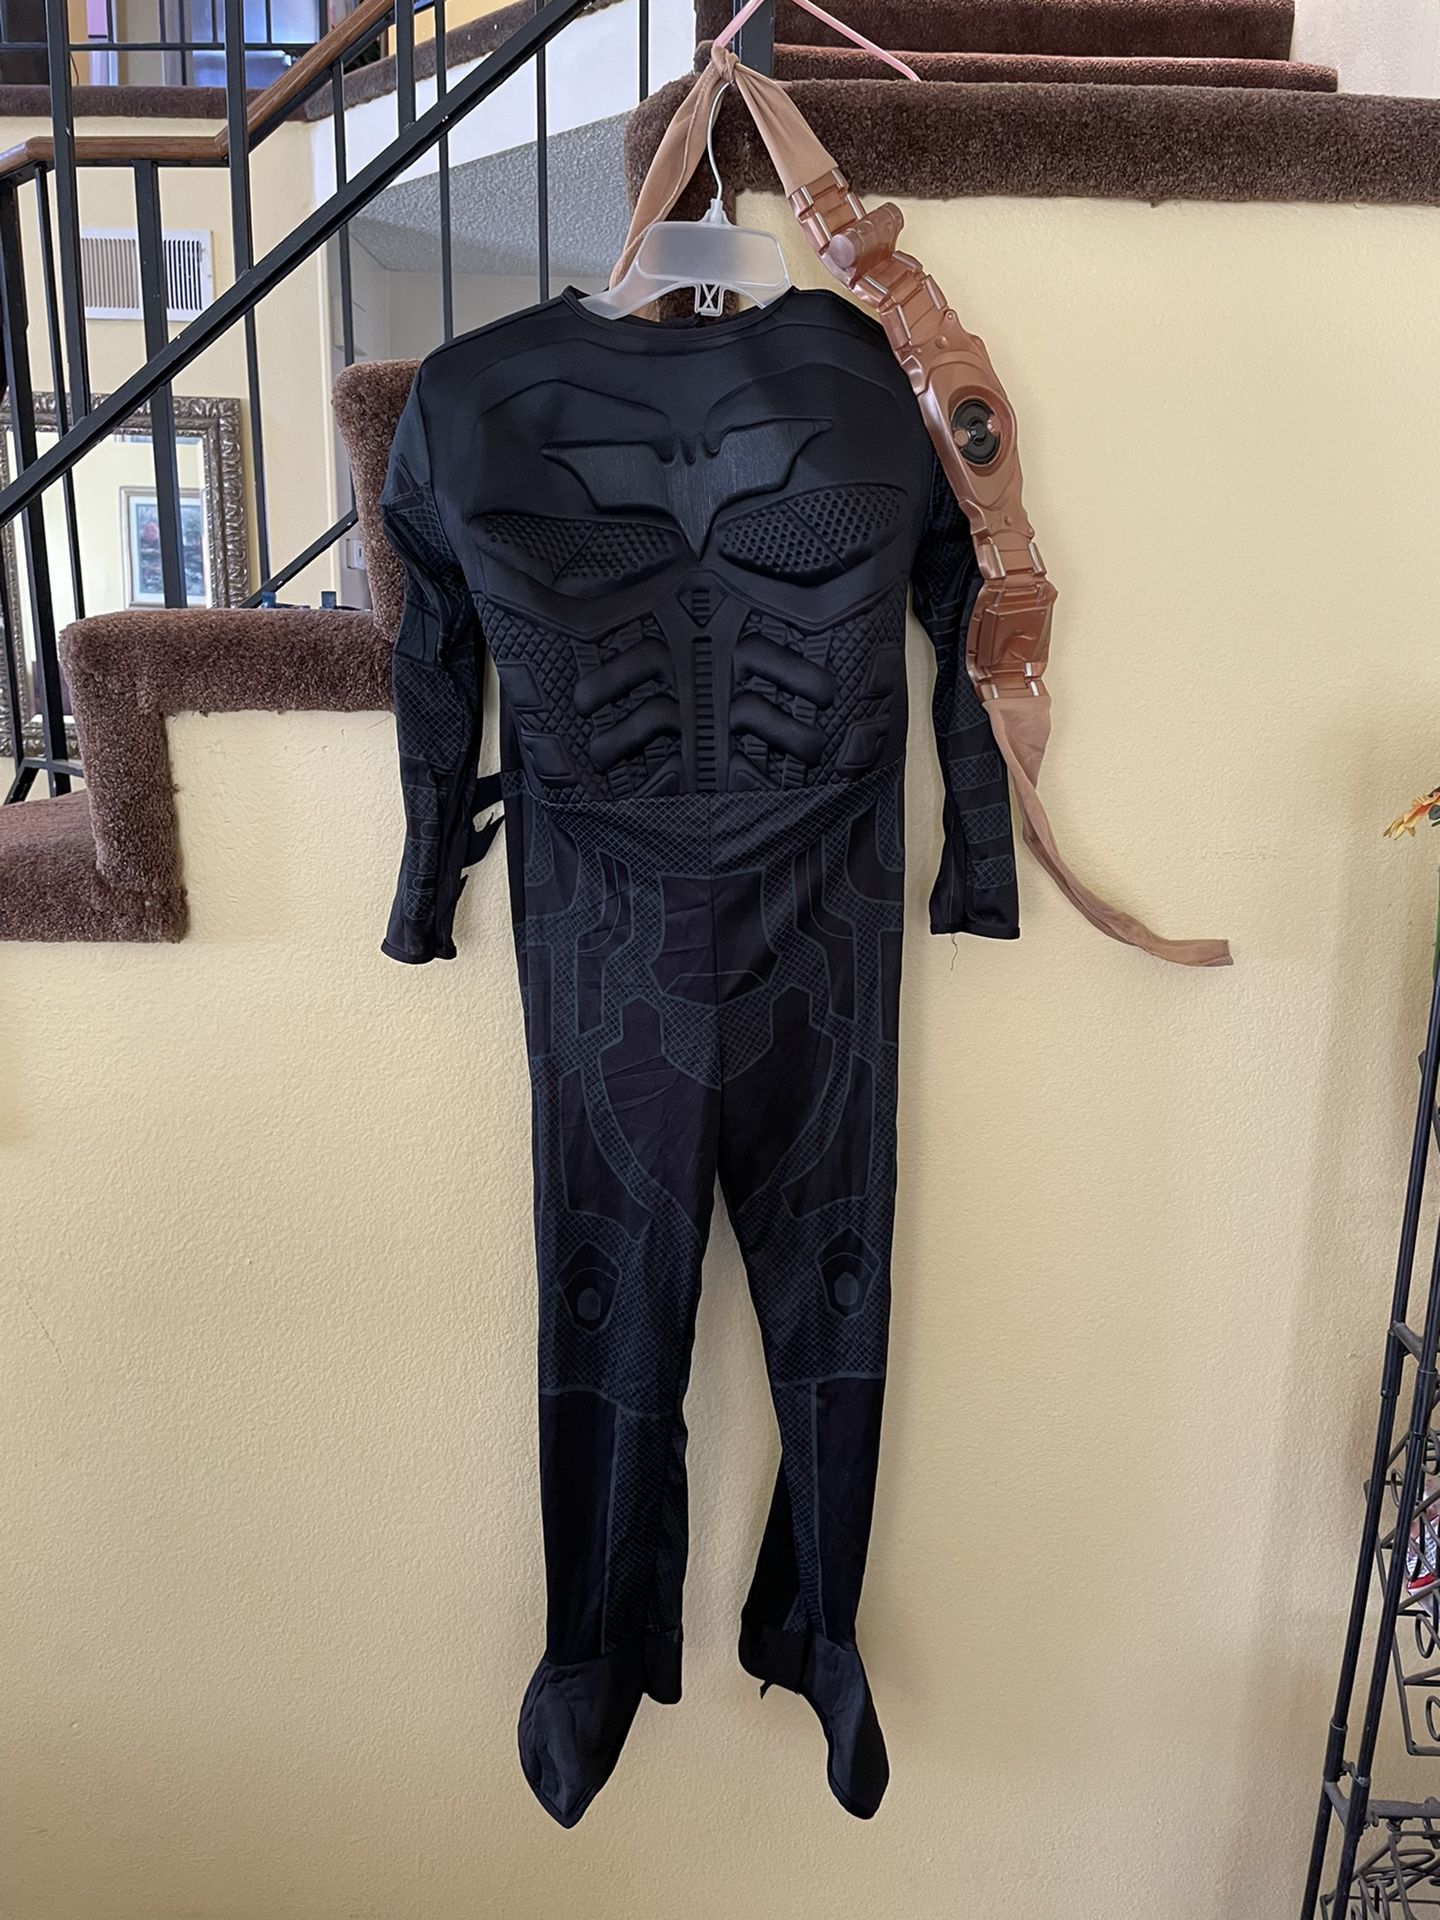 Batman Costume With Cape/ Mask , And Belt For  $15  Size : Medium Kids